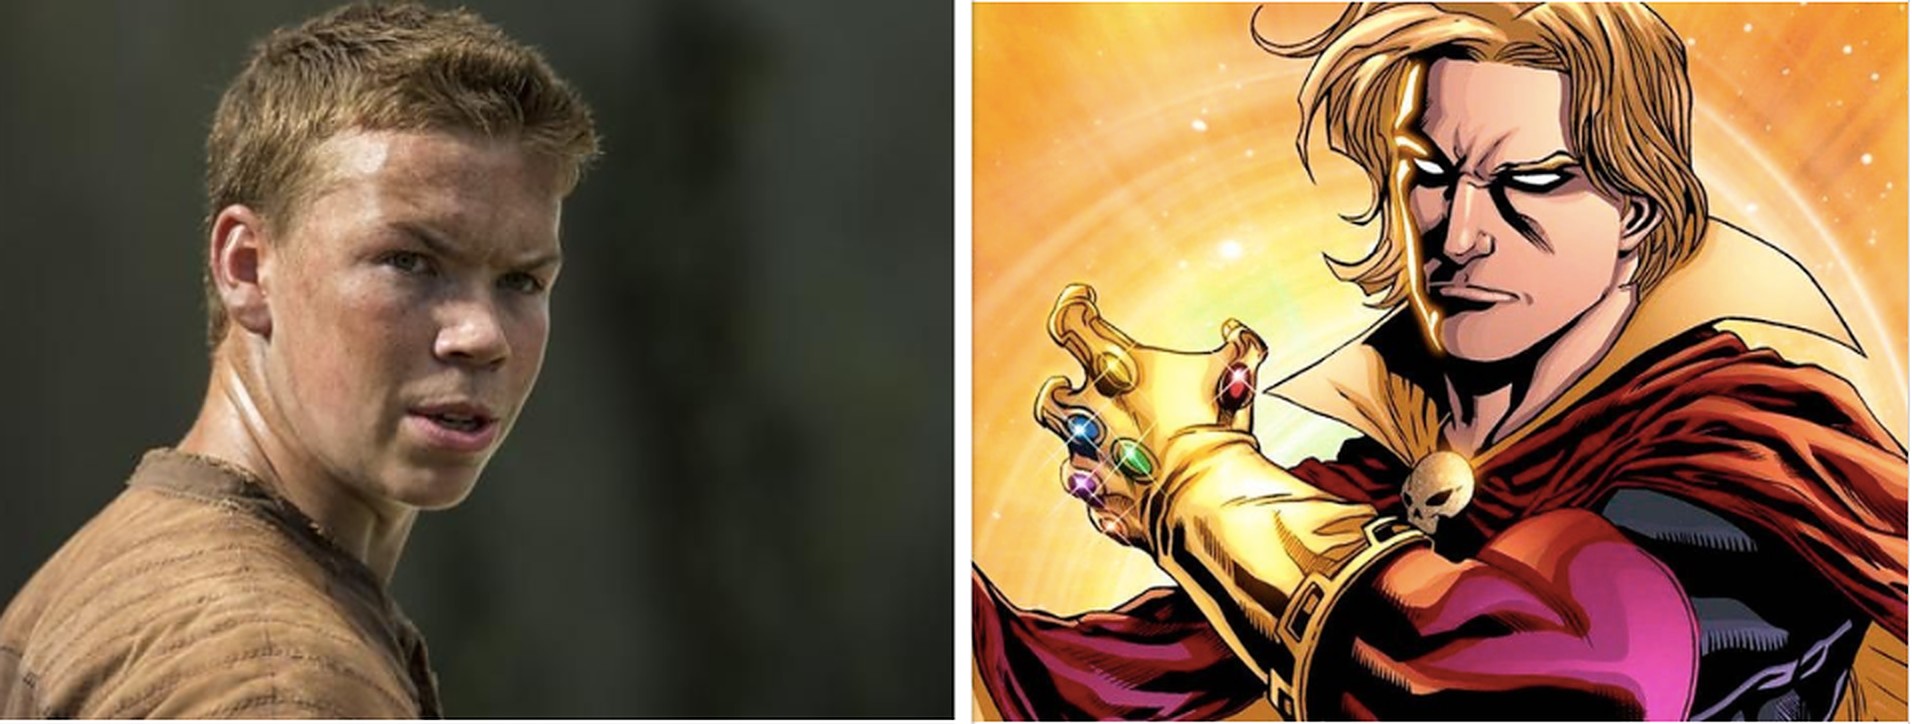 Will Poulter cast as Adam Warlock in 'Guardians of the Galaxy Vol. 3'